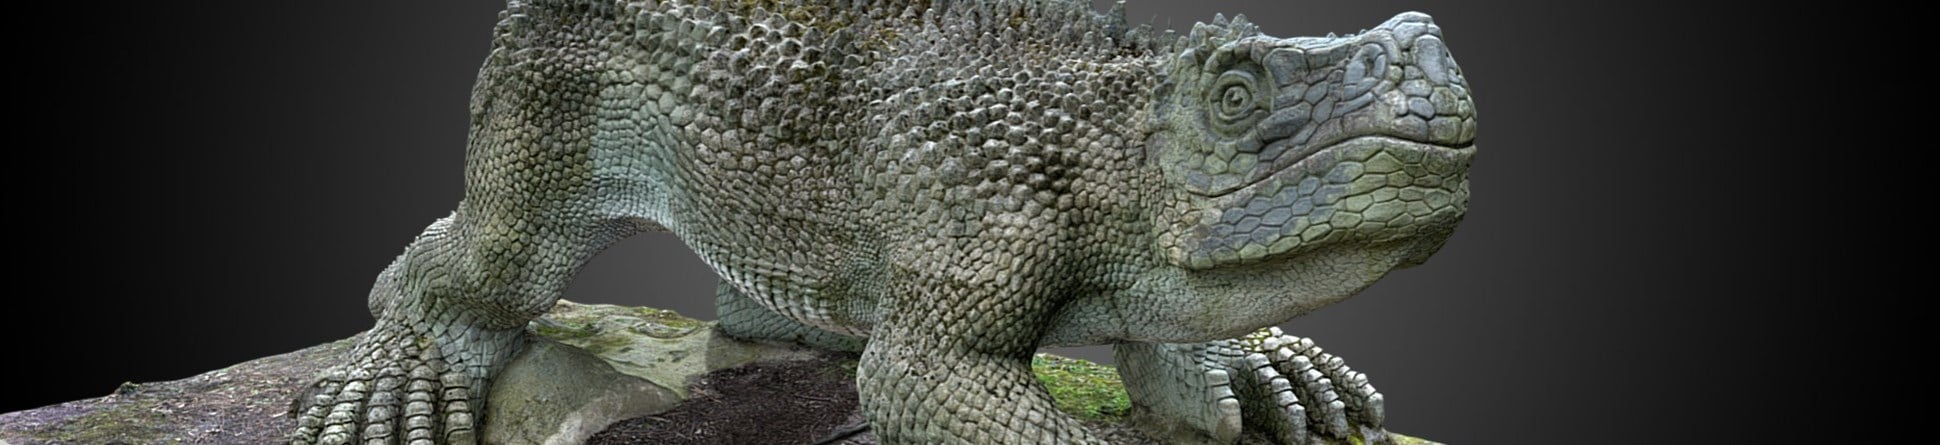 An image of a Dinosaur with scales and spikes running down its back.